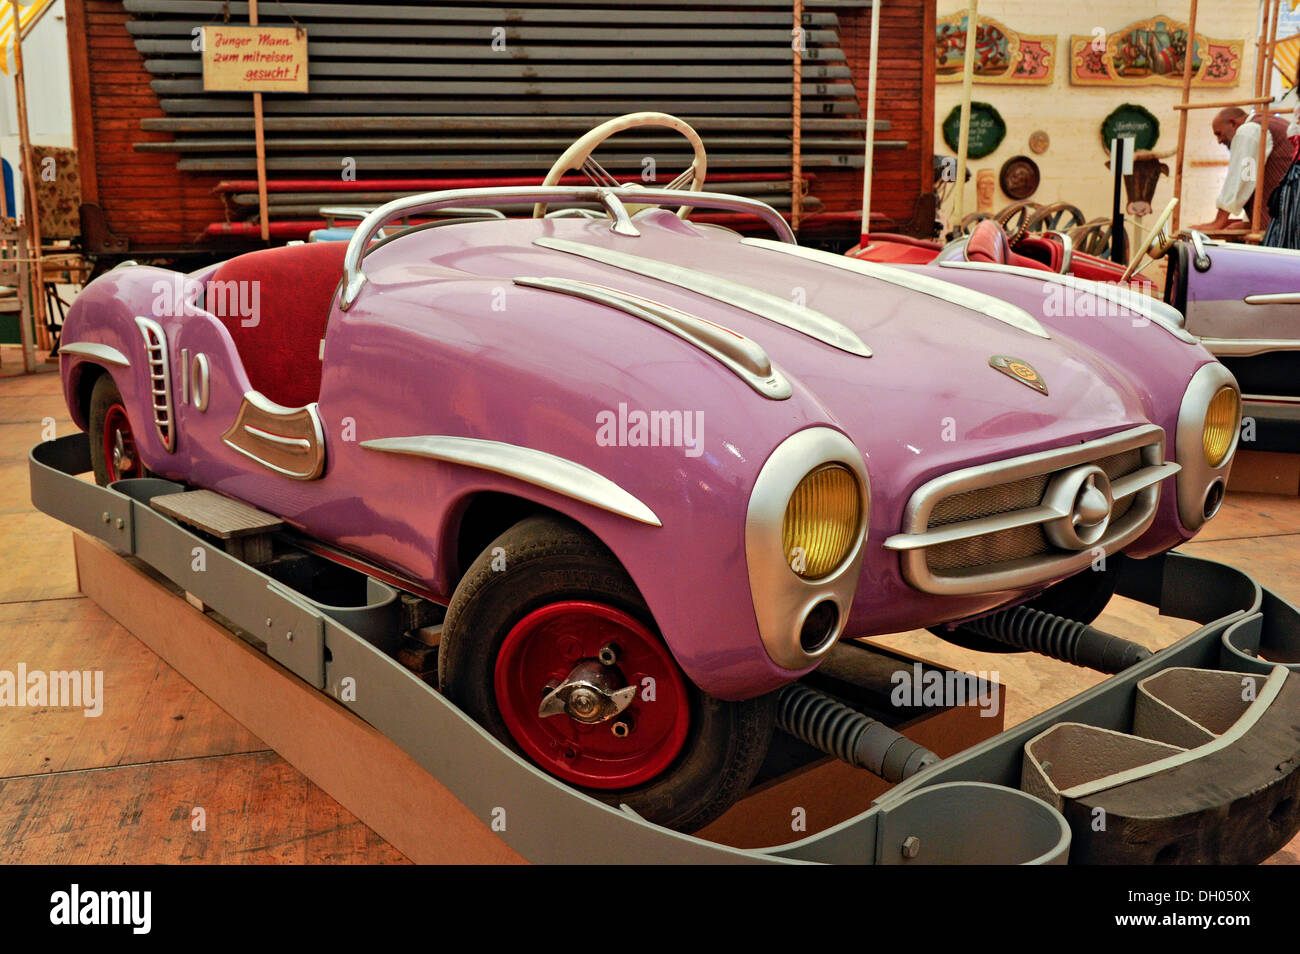 Car from a race track by H Feldl, Model BSW, Mercedes 300 SL, 1962, dodgem from an old Autodrom, historical Oktoberfest, Munich Stock Photo